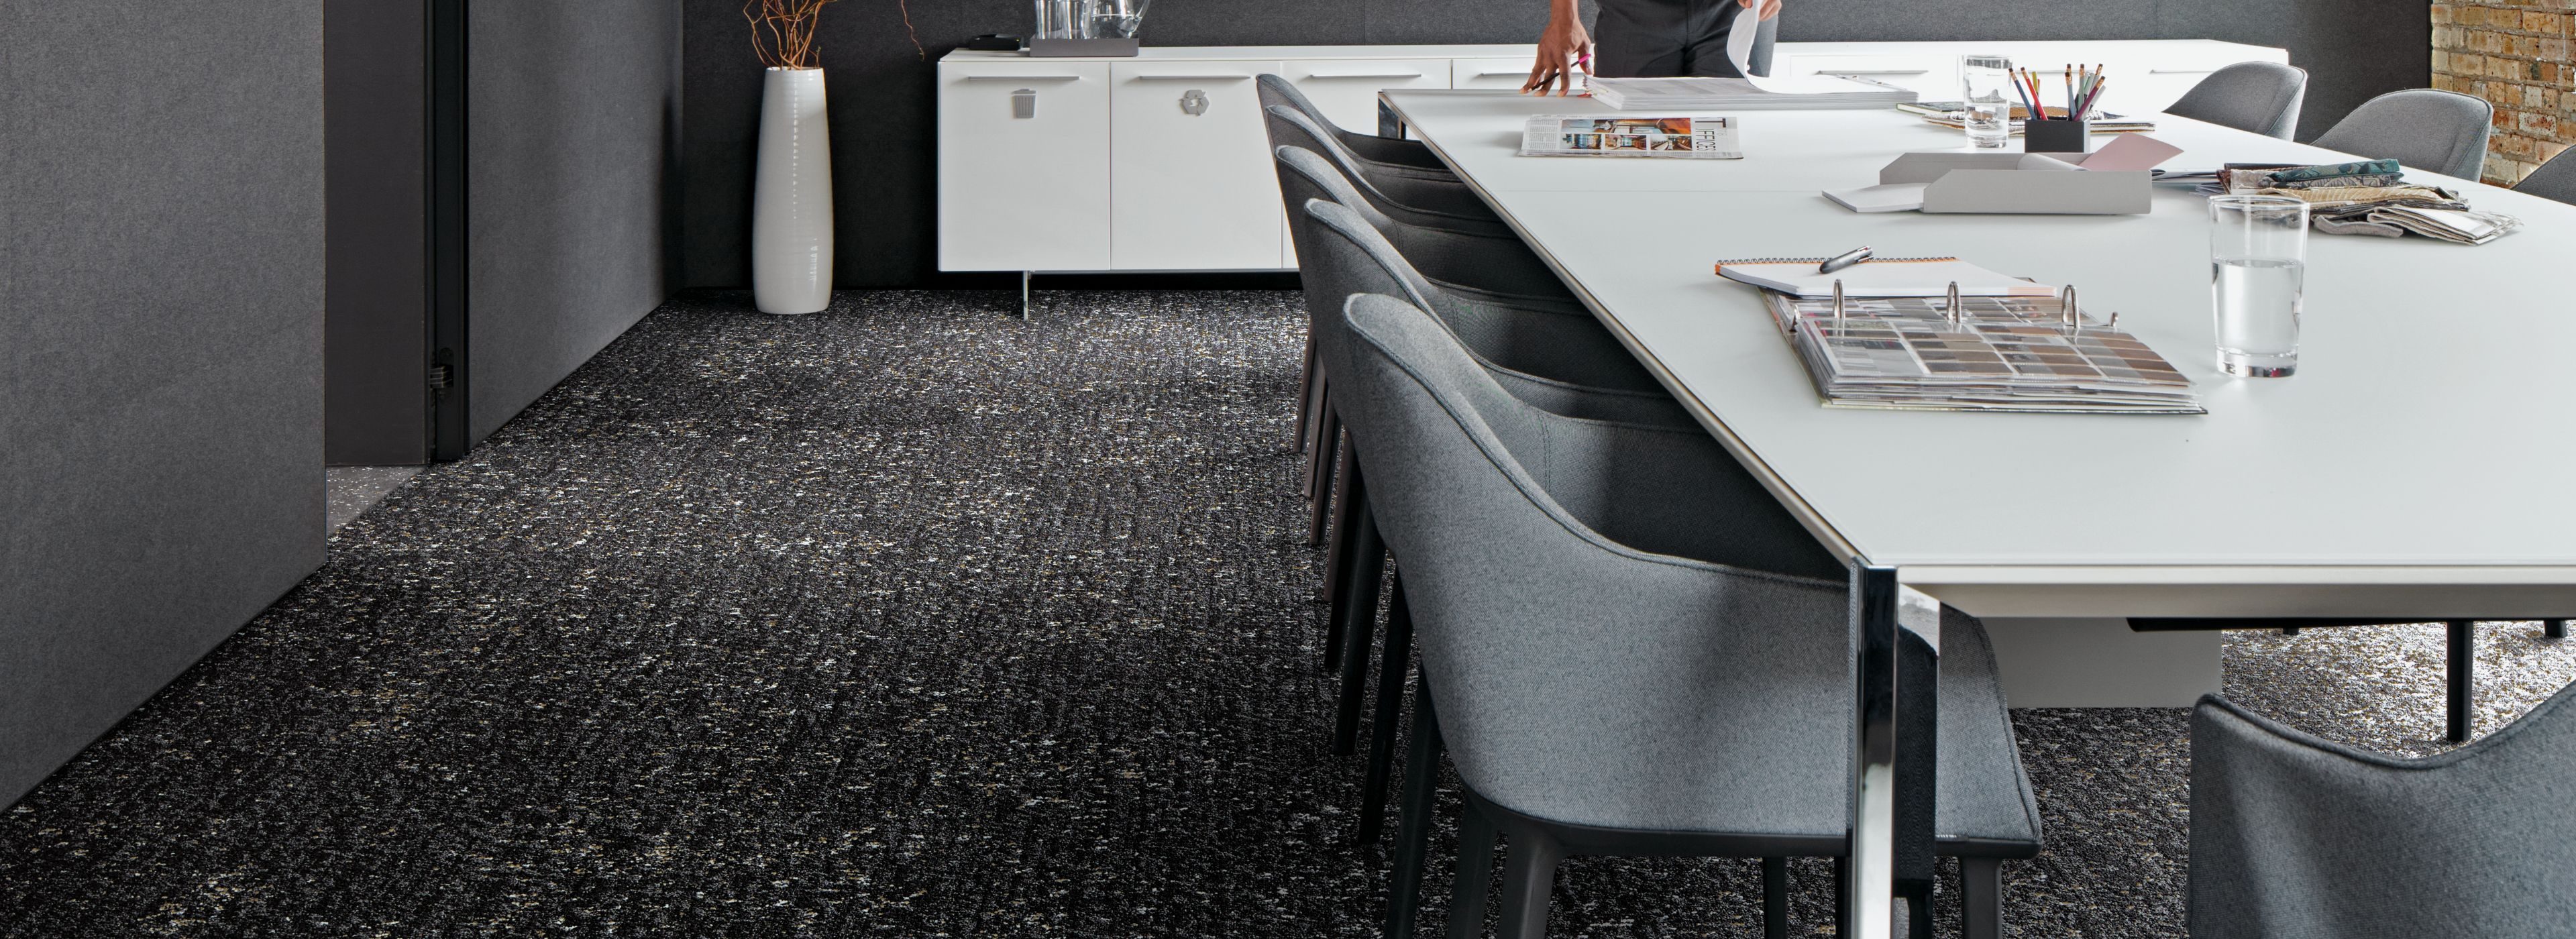 image Interface Step in Time and Walk the Aisle carpet tile in meeting area with table and chairs numéro 1